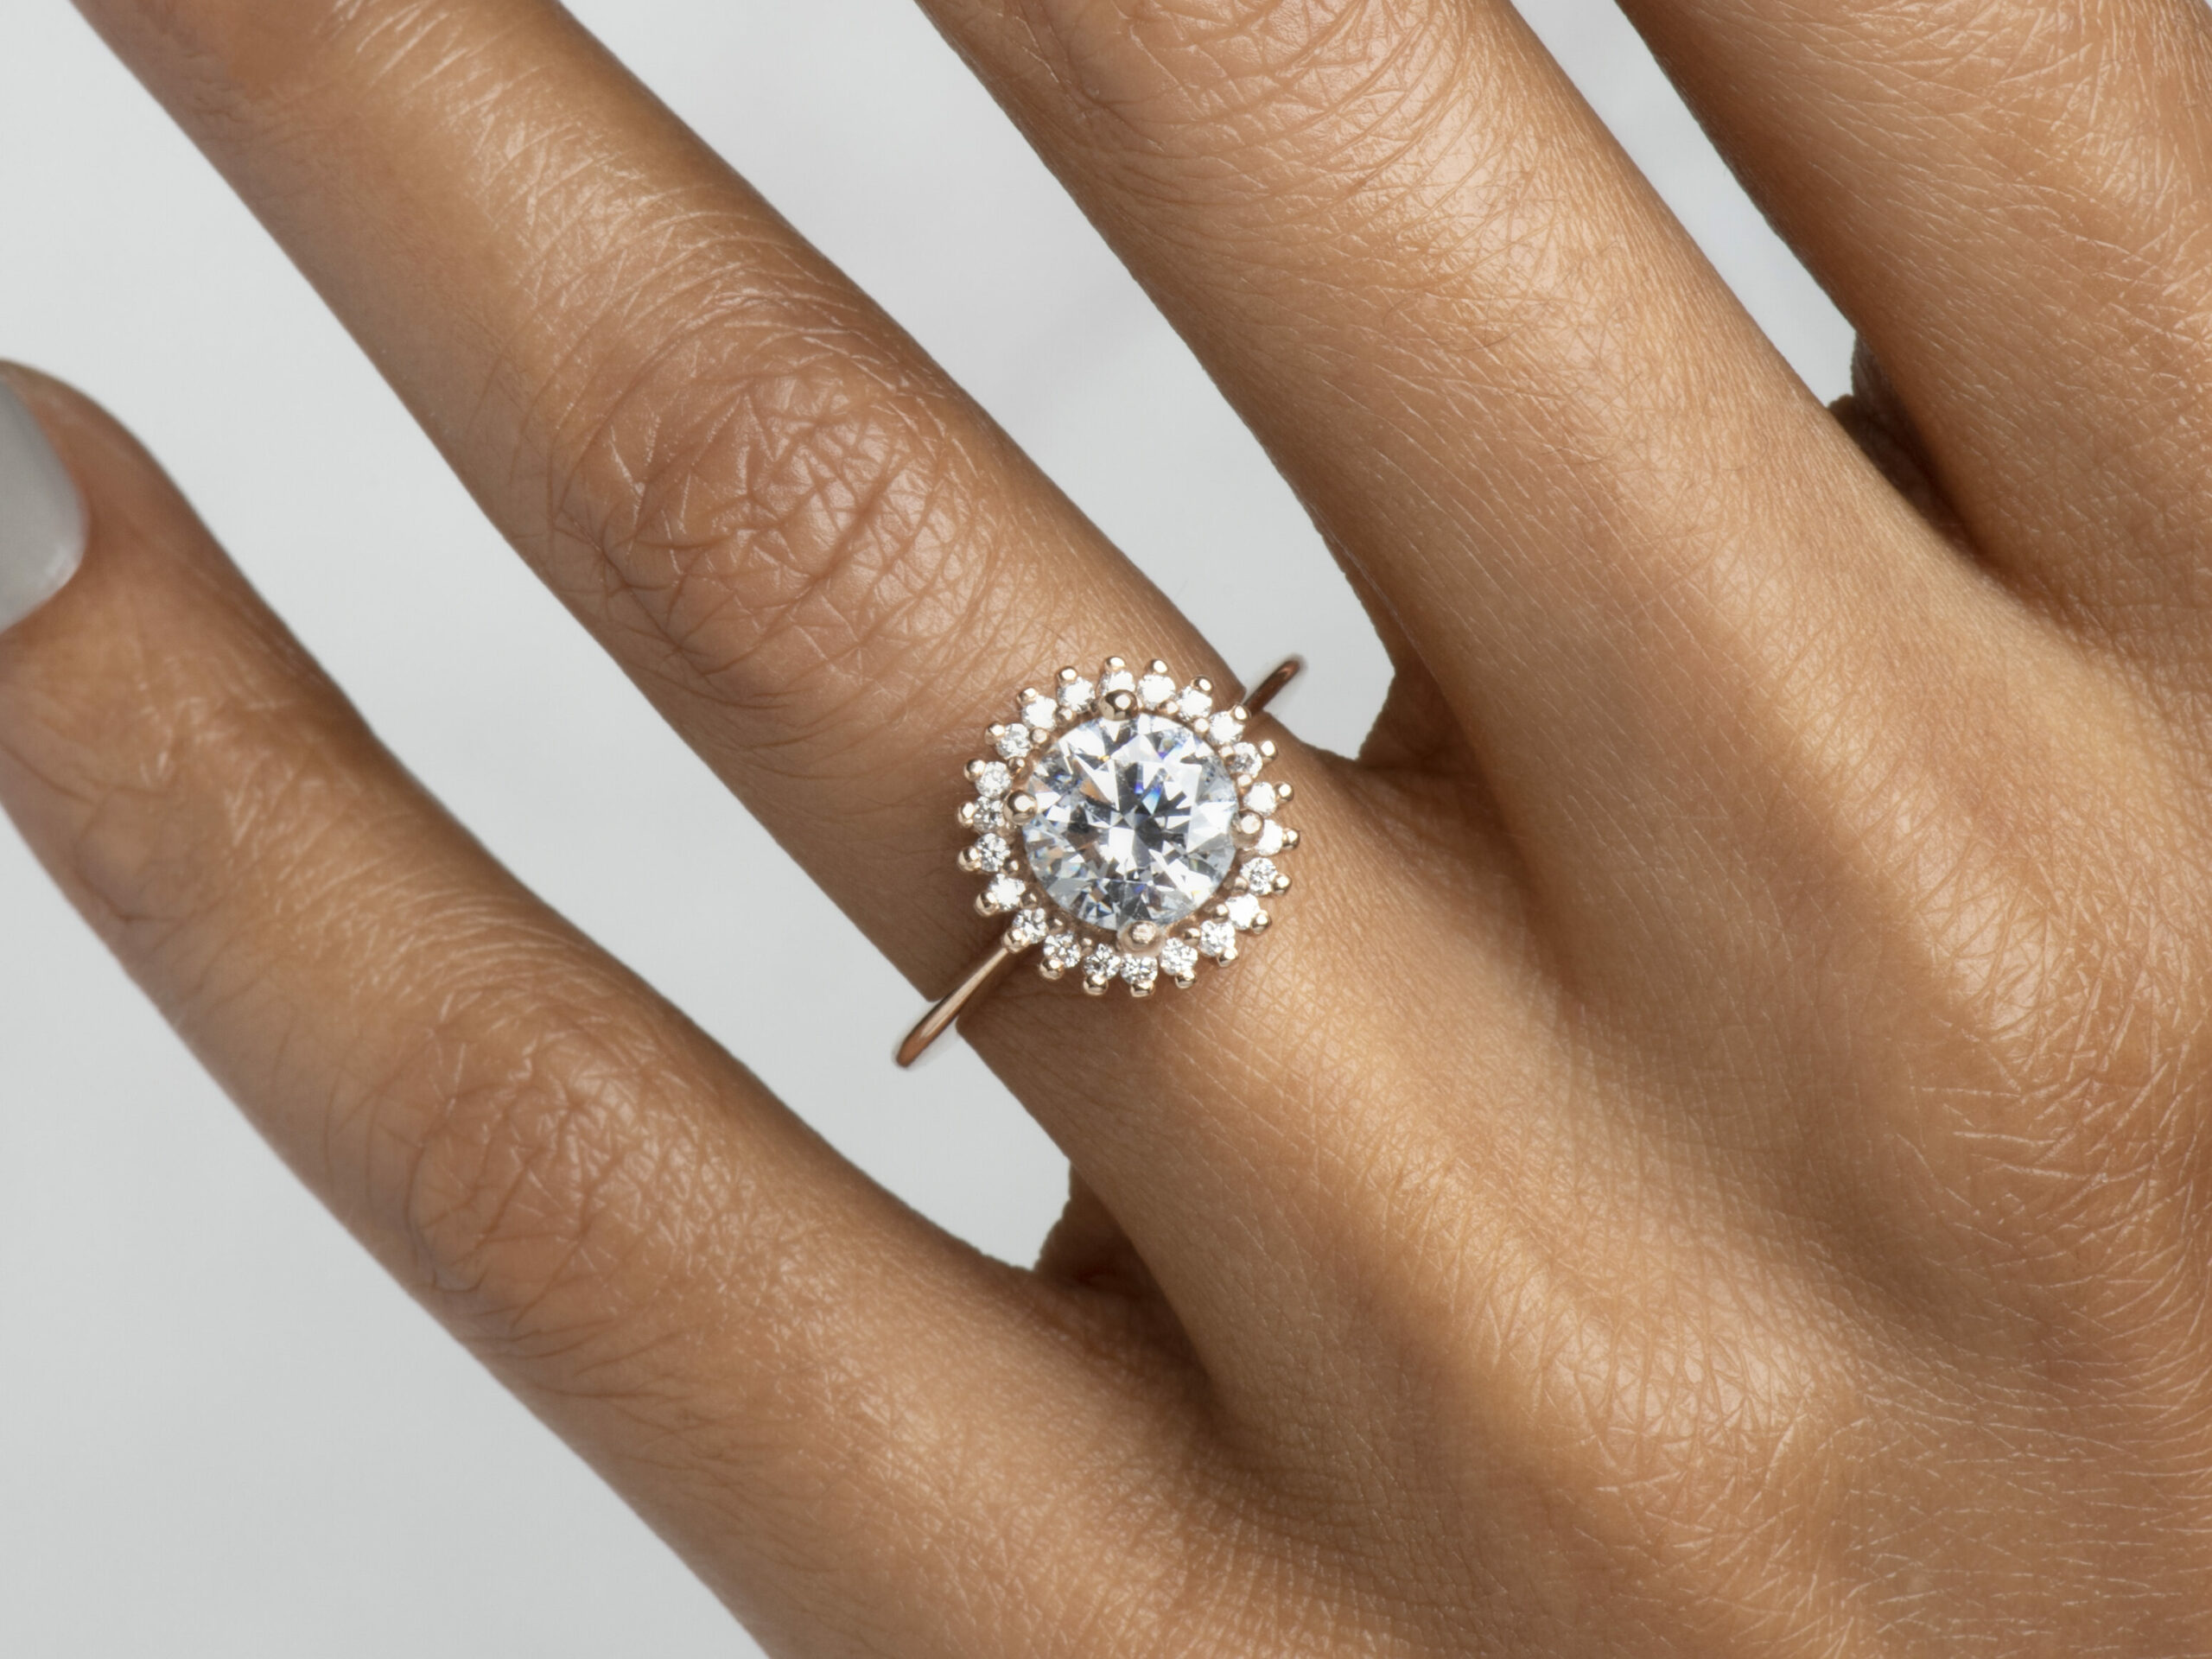 Close-up of a hand showcasing a classic halo-style ring with a brilliant diamond center stone encircled by a shimmering diamond halo.